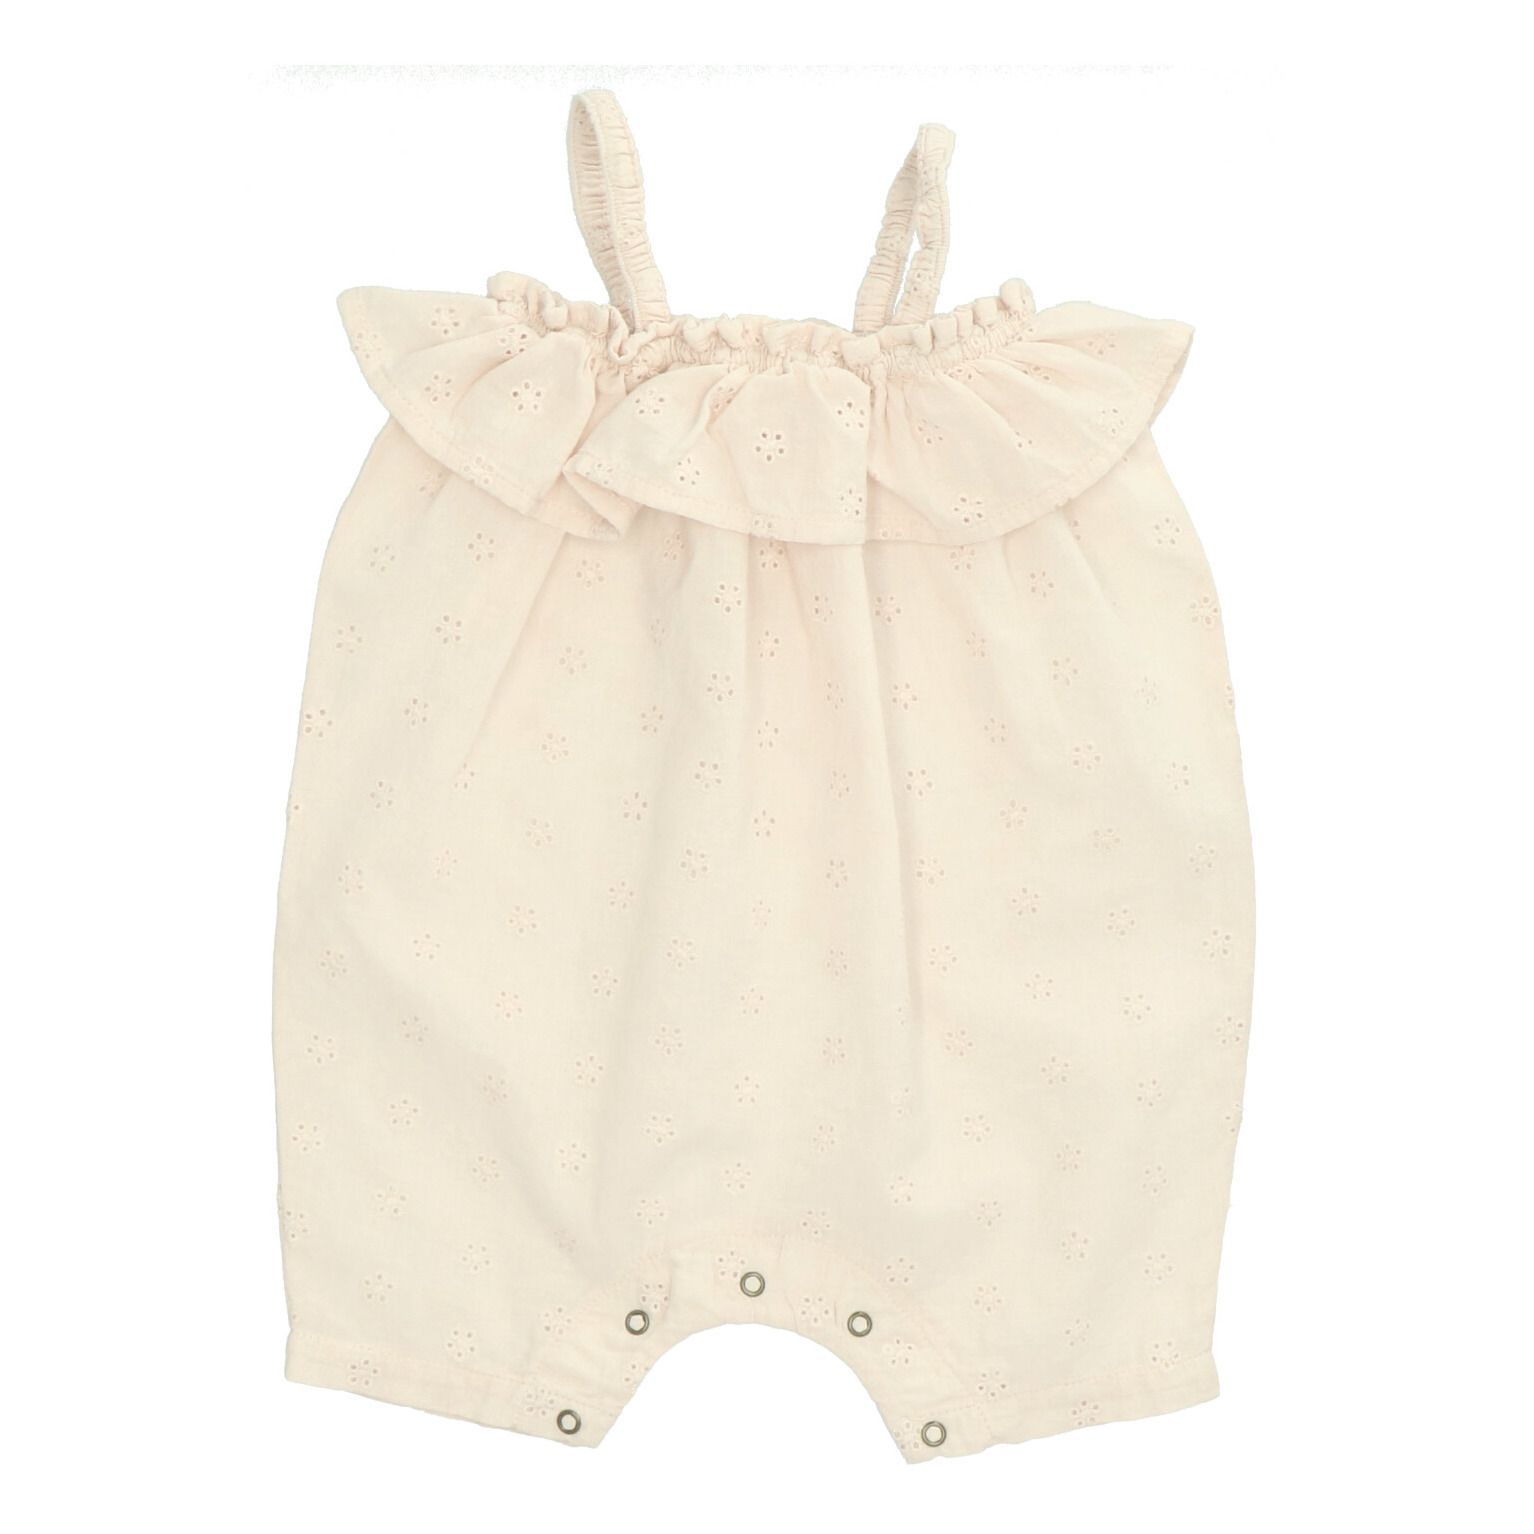 Heart of Gold - Combishort Broderie Anglaise Coton Bio Katia - Fille - Rose pâle